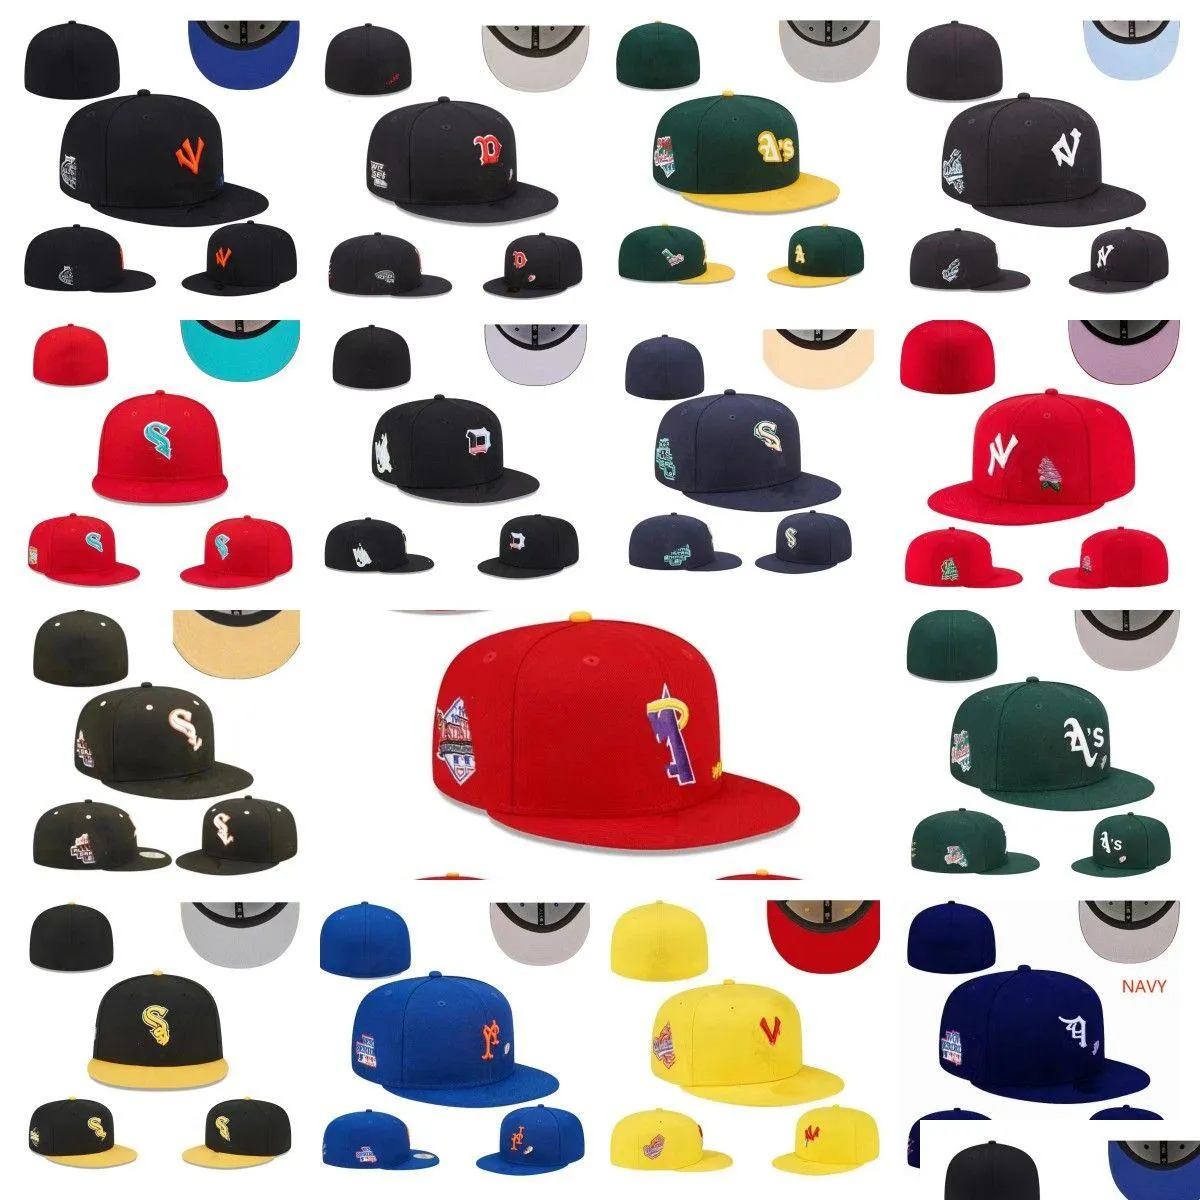 Hot Fitted hats sizes Fit hat Baseball football Snapbacks Designer Flat hat Active Adjustable Embroidery Cotton Mesh Caps All Team Logo Outdoor Sports cap sizes